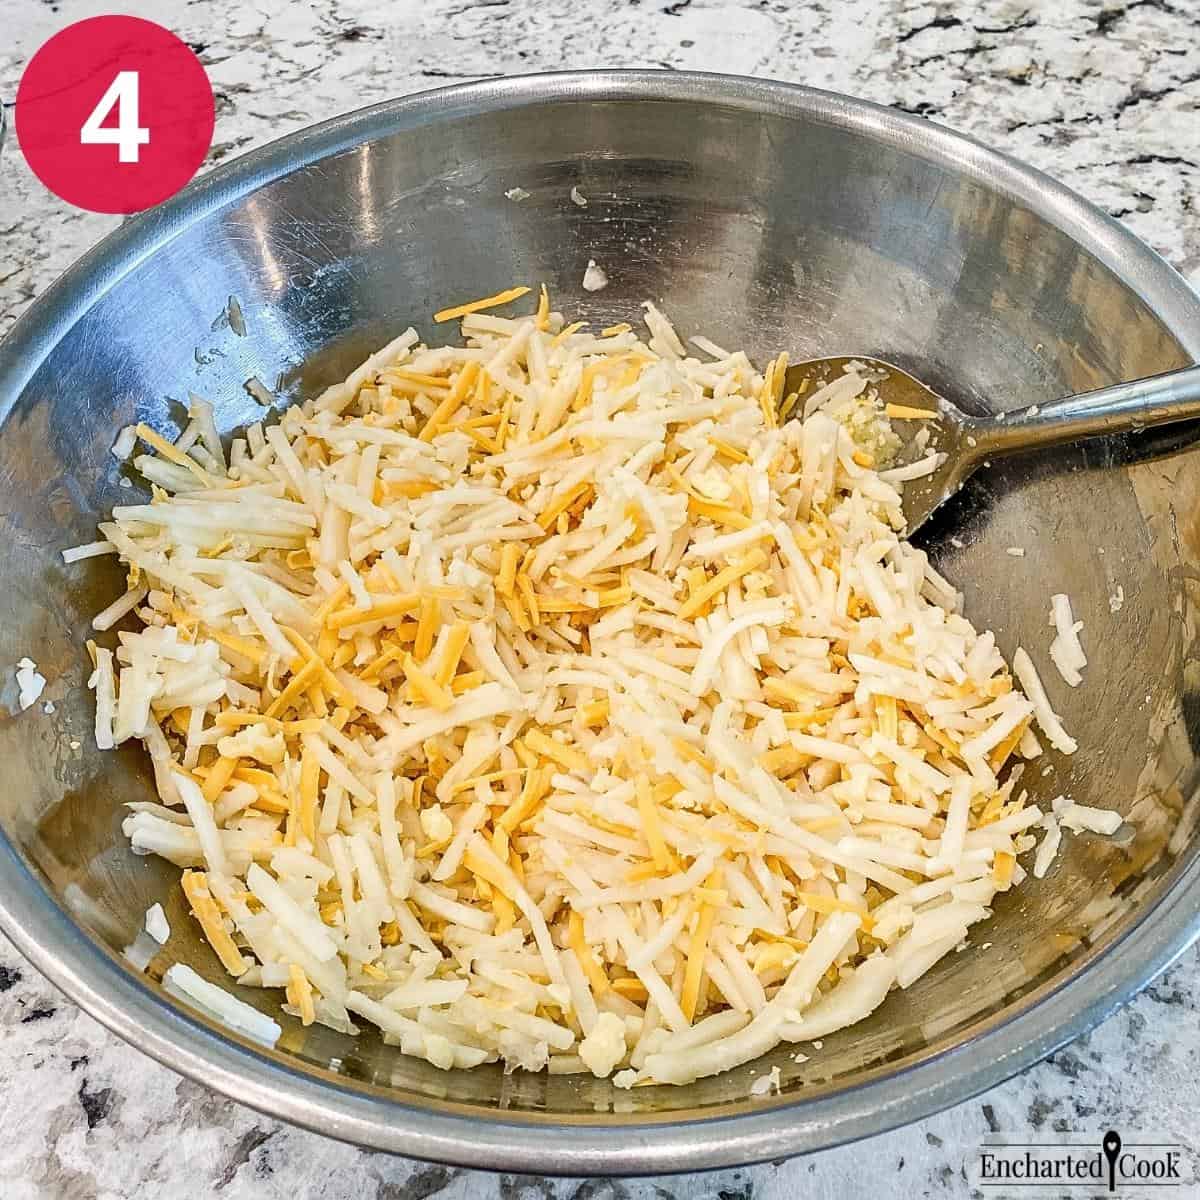 Process Photo 4 - Shredded cheddar cheese is mixed into the hash browns.